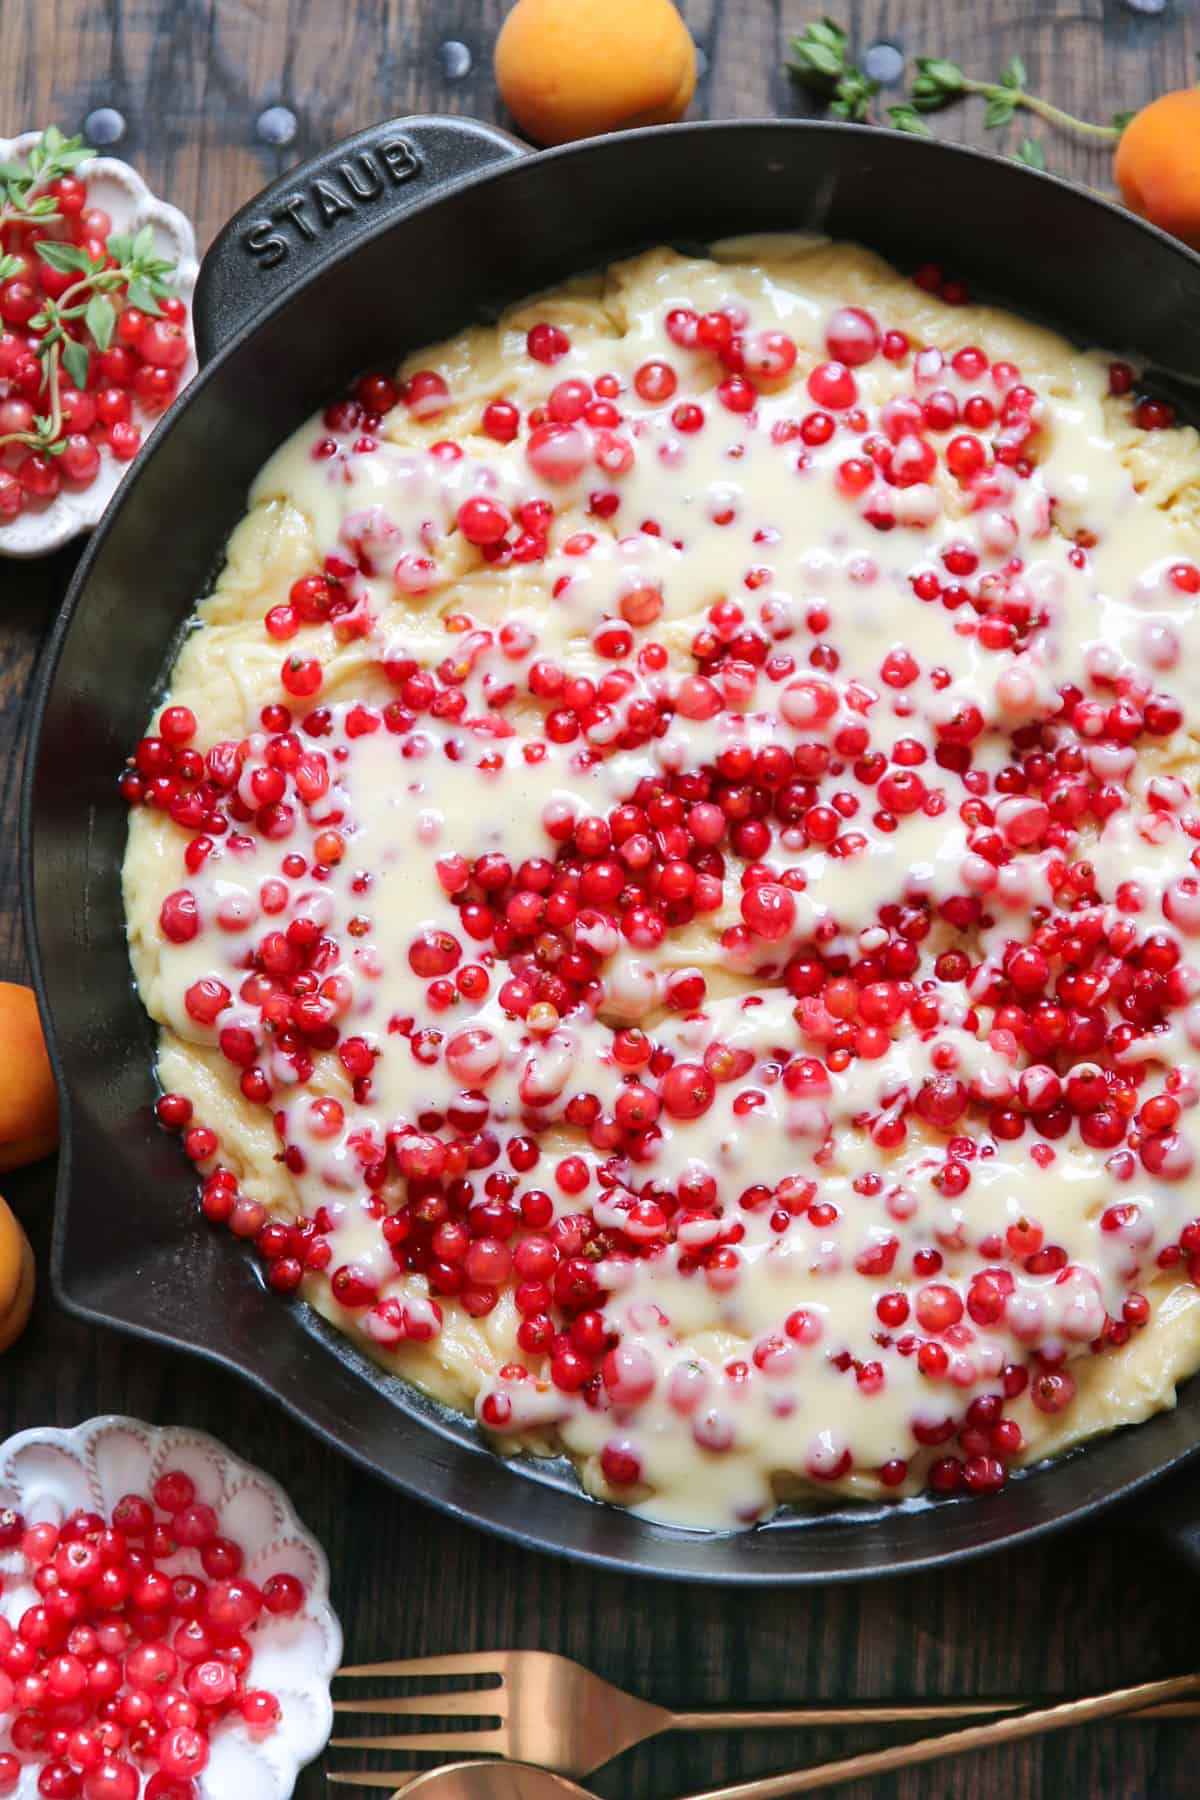 cake batter topped with cream cheese filling and red currants - in a cast iron skillet.